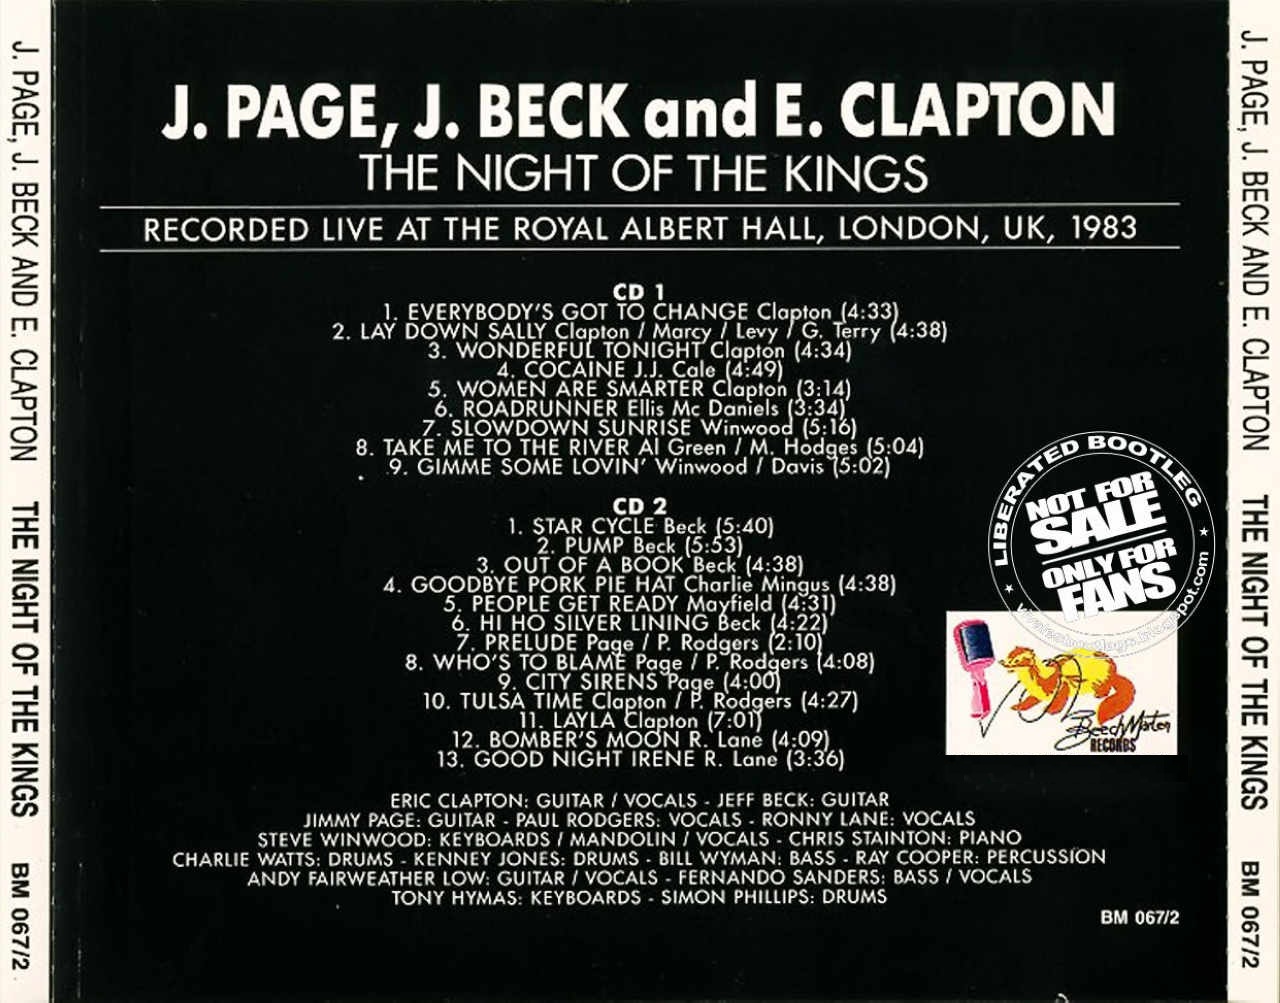 Beck перевод. Jimmy Page, Jeff Beck, Eric Clapton 1983 - Night of the Kings. Jeff Beck and Eric Clapton in Royal Albert Hall 1983. Джимми пейдж 1983. Jimmy Page/Eric Clapton/Jeff Beck - Arms - London 9/20/1983.